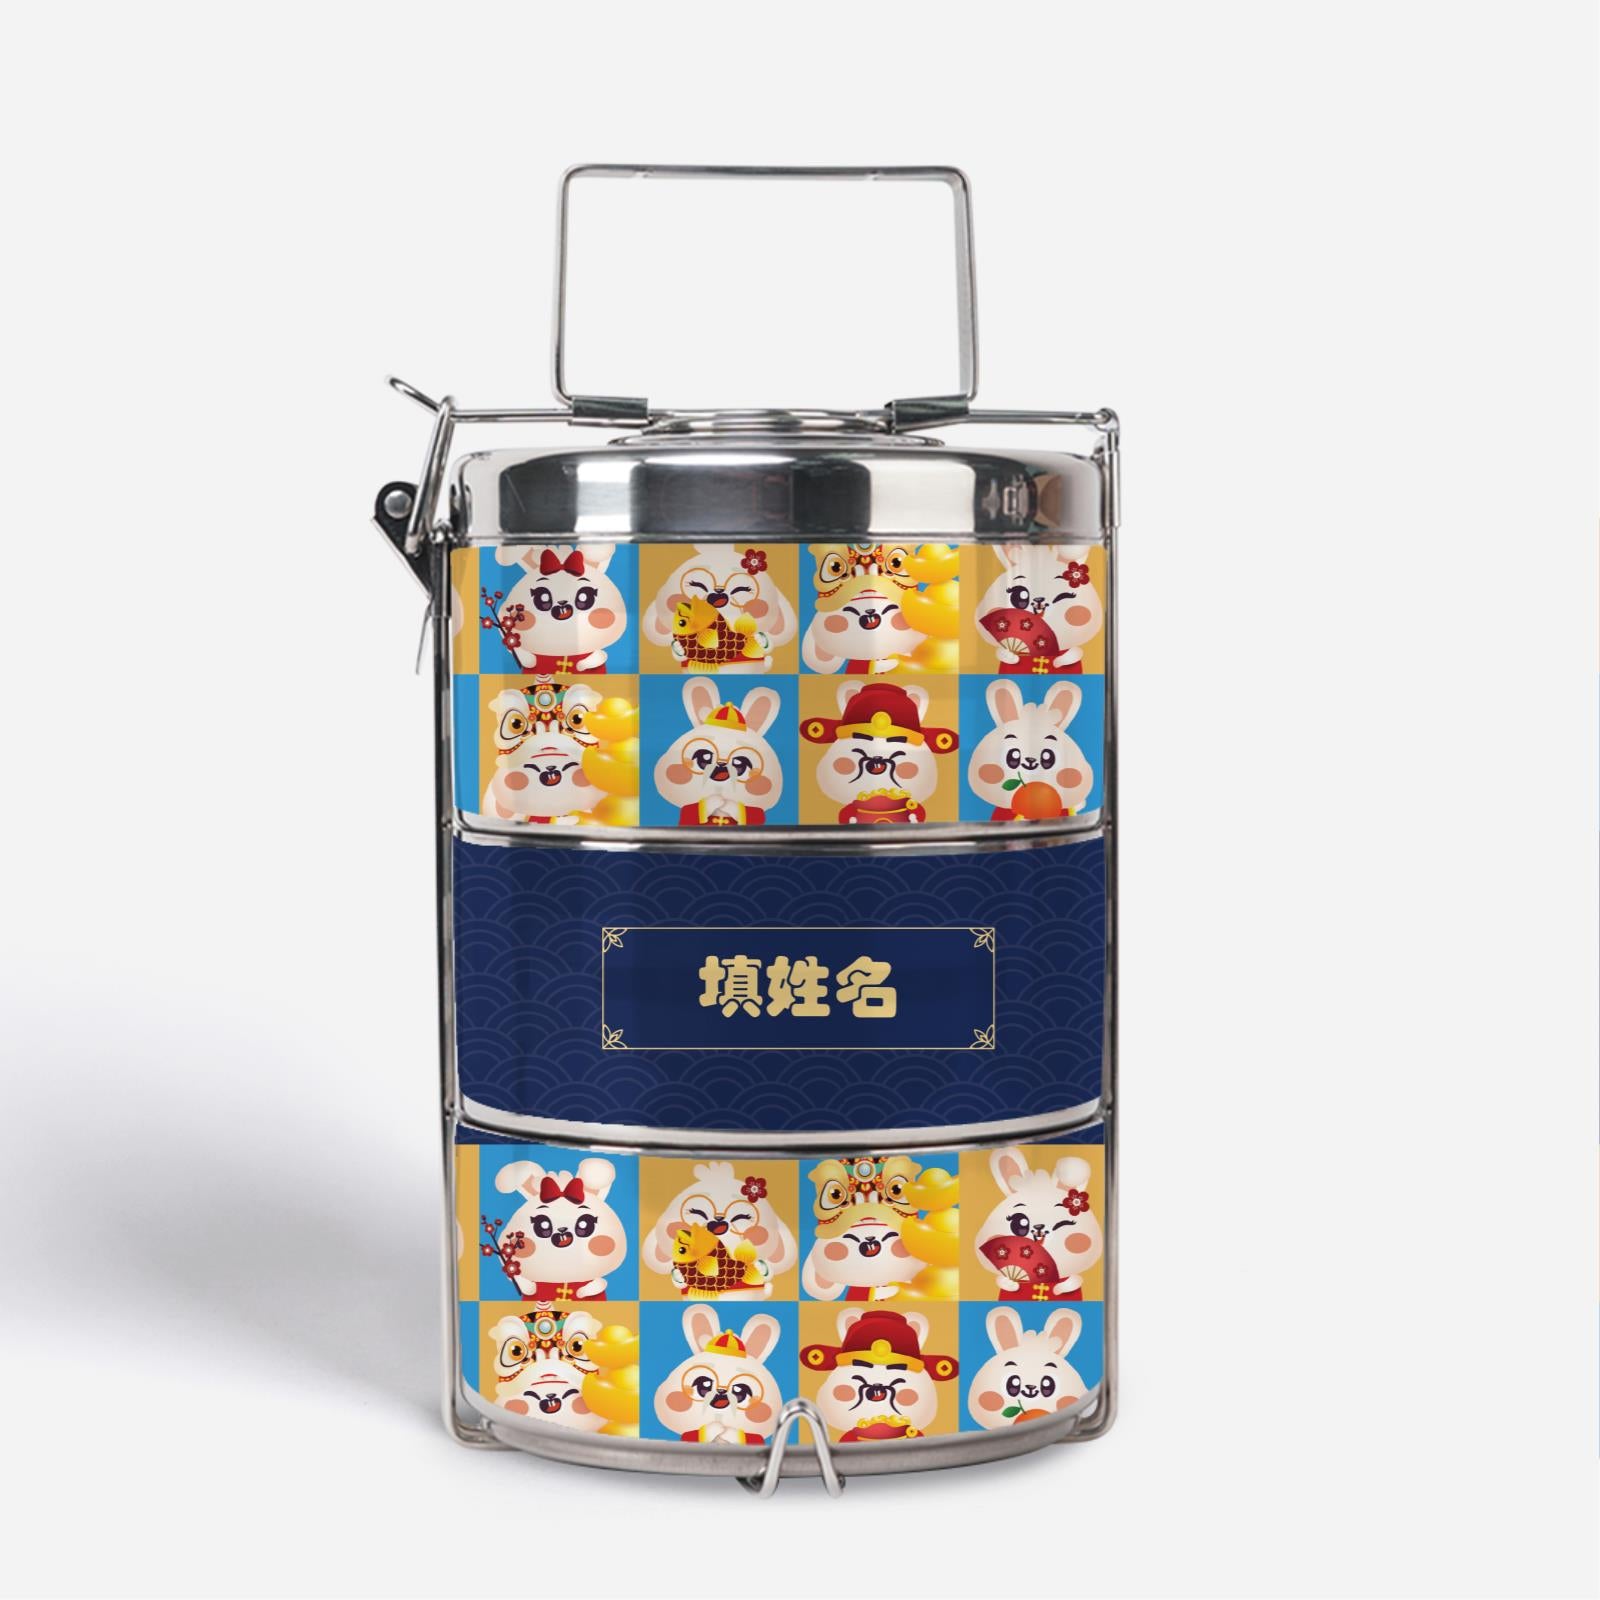 Cny Rabbit Family - Rabbit Family Blue Premium Tififn Carrier With Chinese Personalization